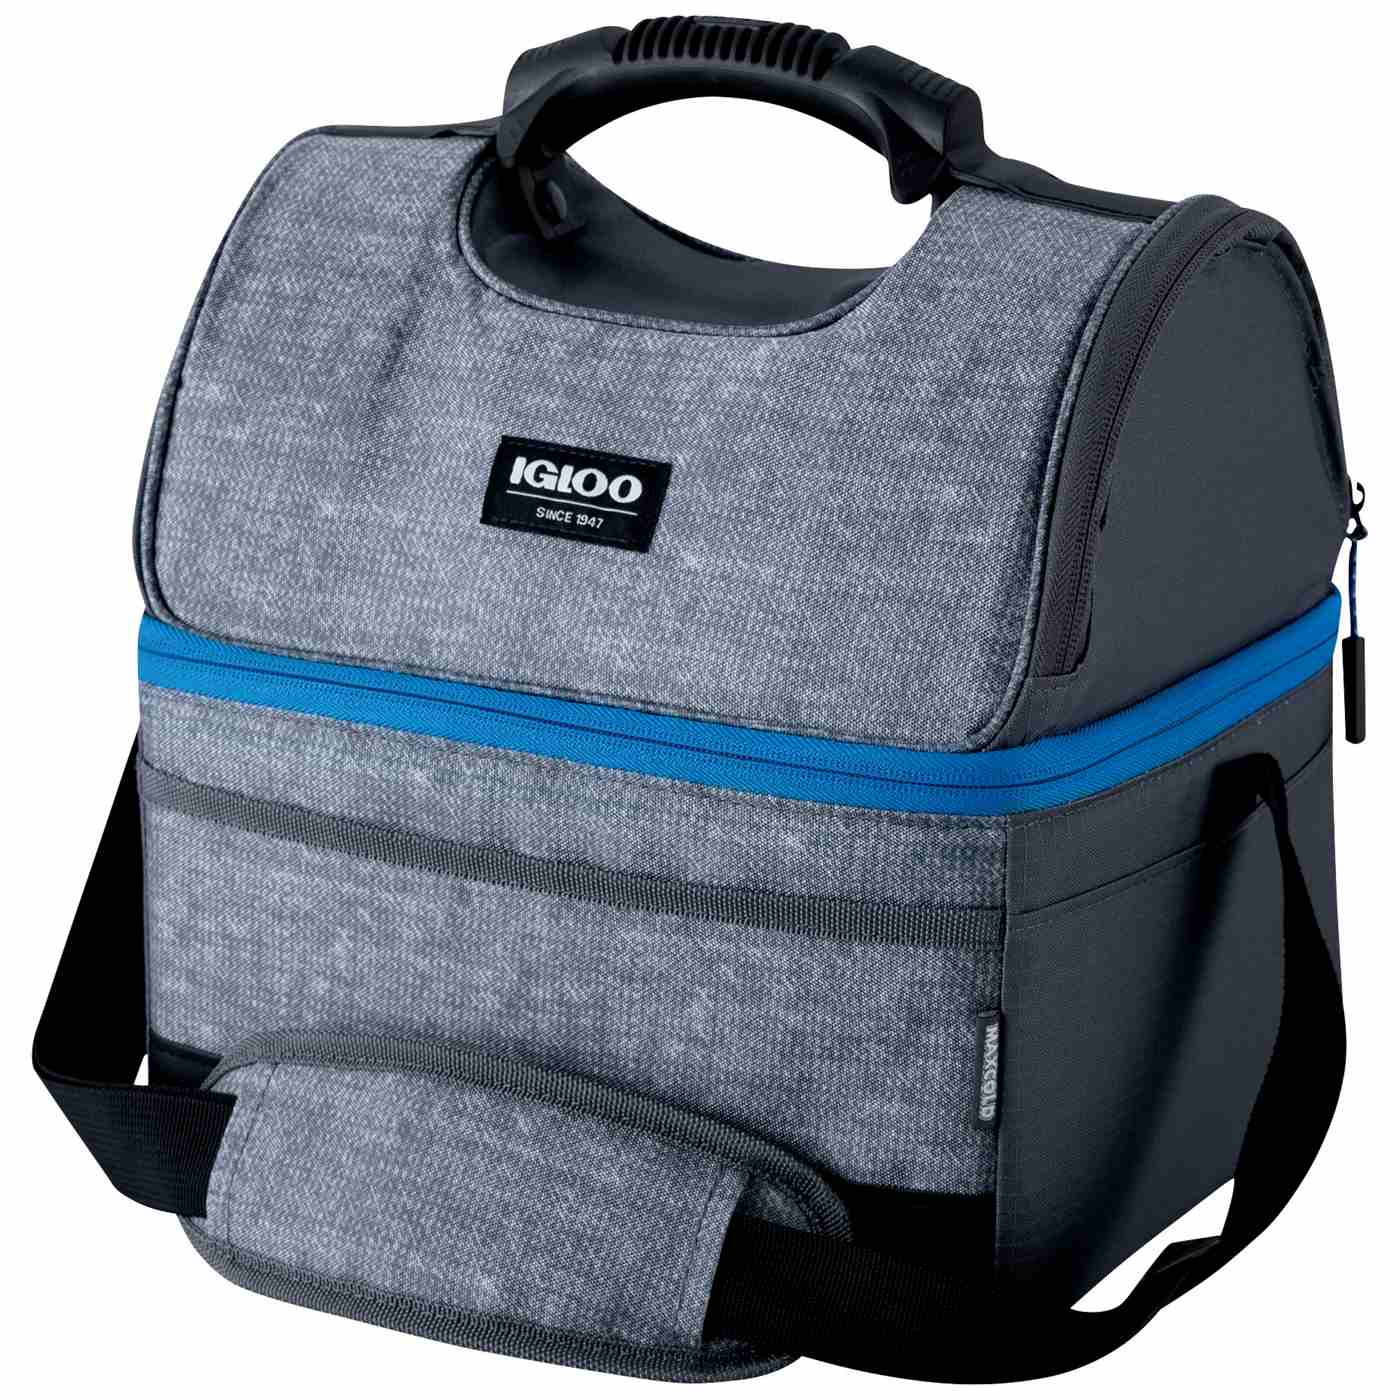 Igloo MaxCold Playmate Gripper Cooler Bag - Gray; image 2 of 4